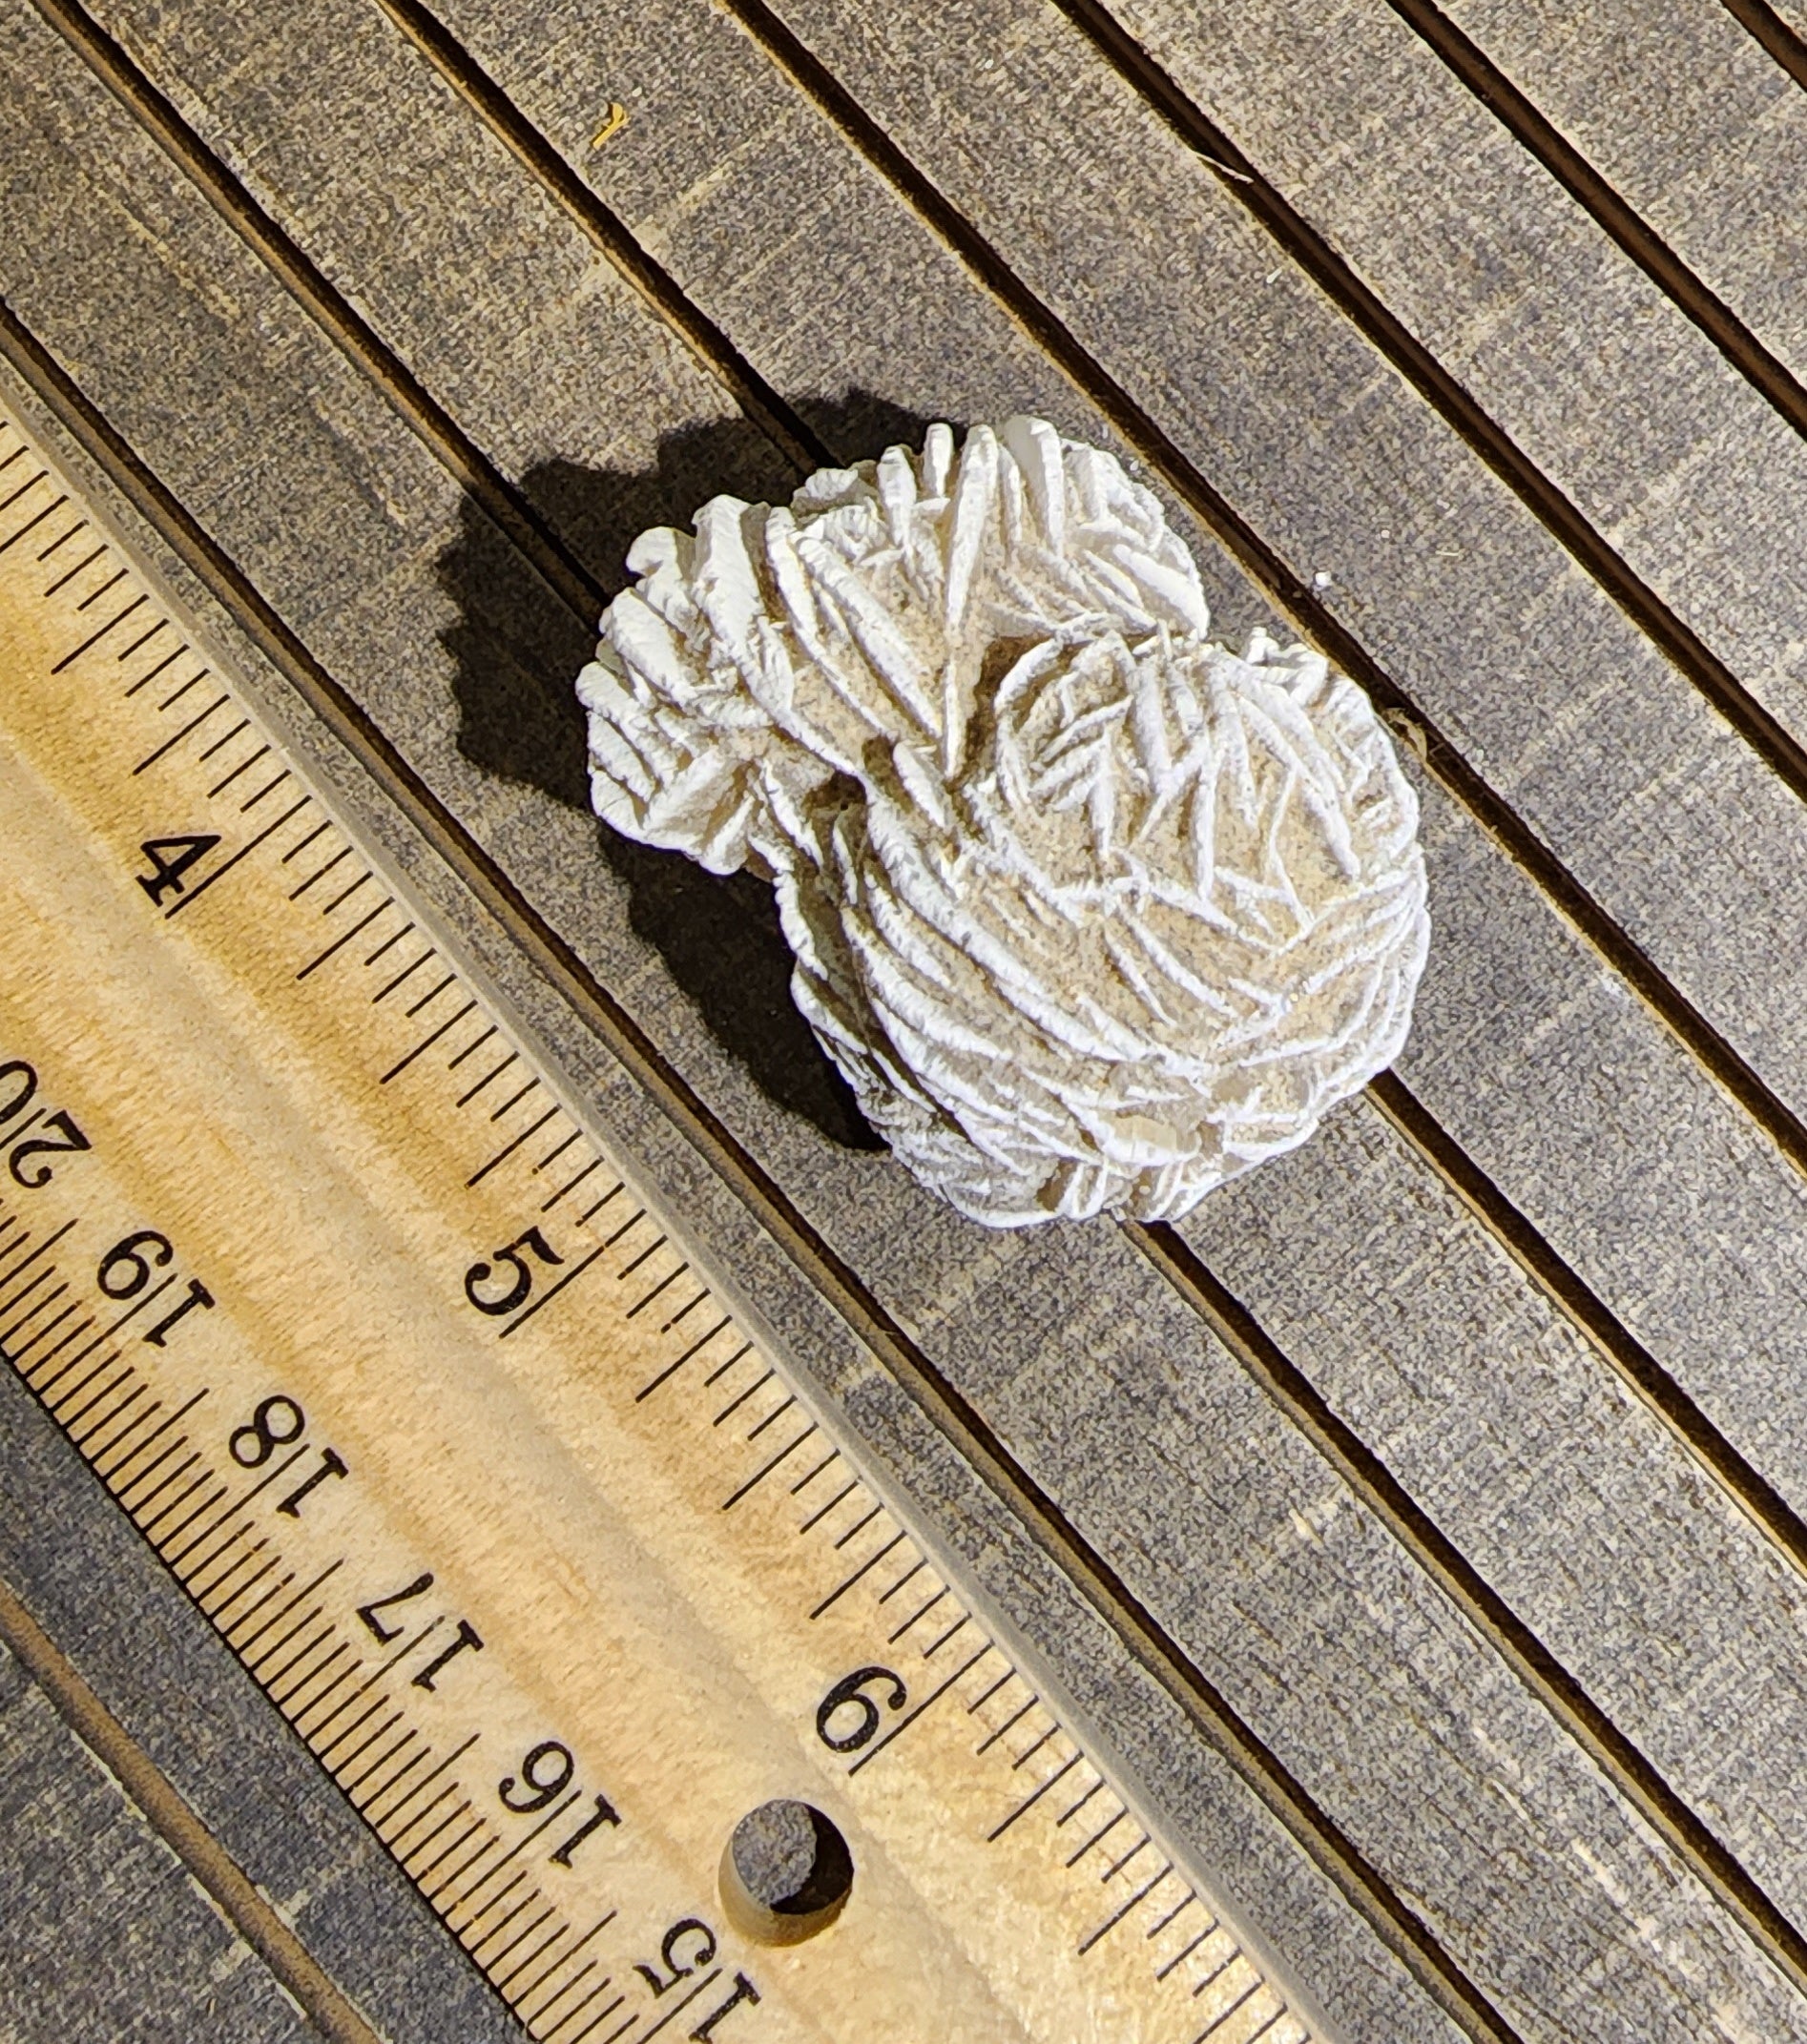 Desert Rose Crystal - 1 Piece for Intuition, Balance, Chakra Cleansing